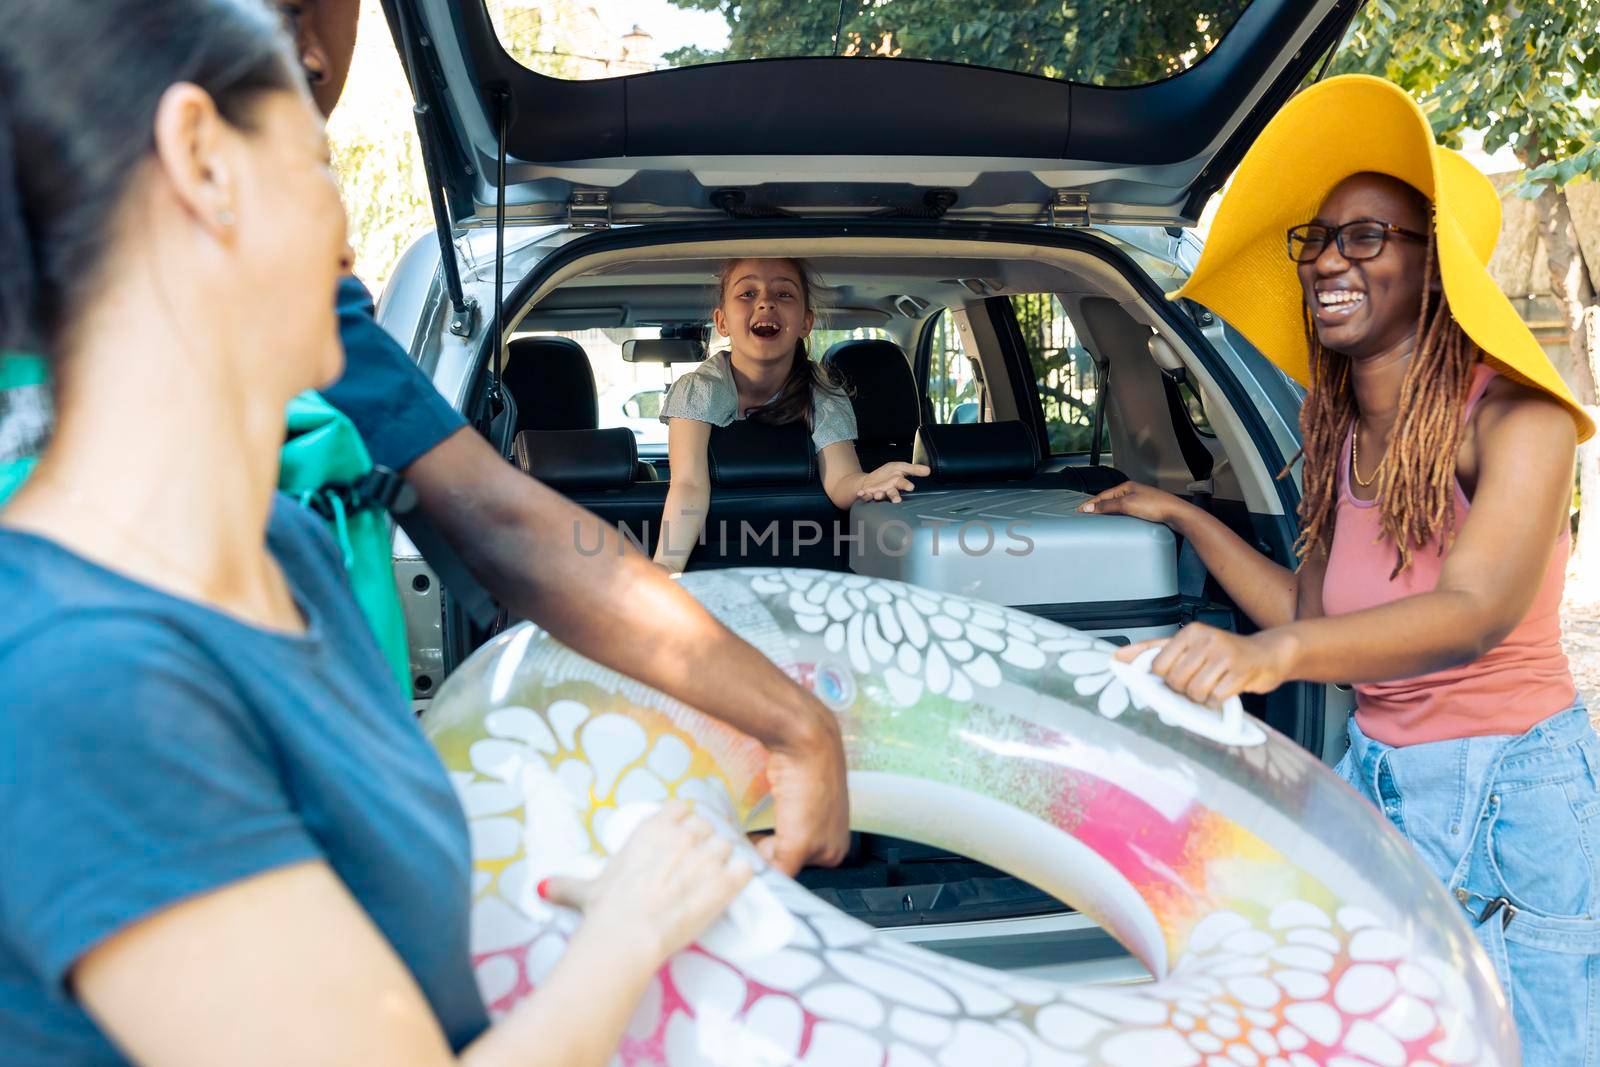 Multiethnic family and friends loading bags in car by DCStudio